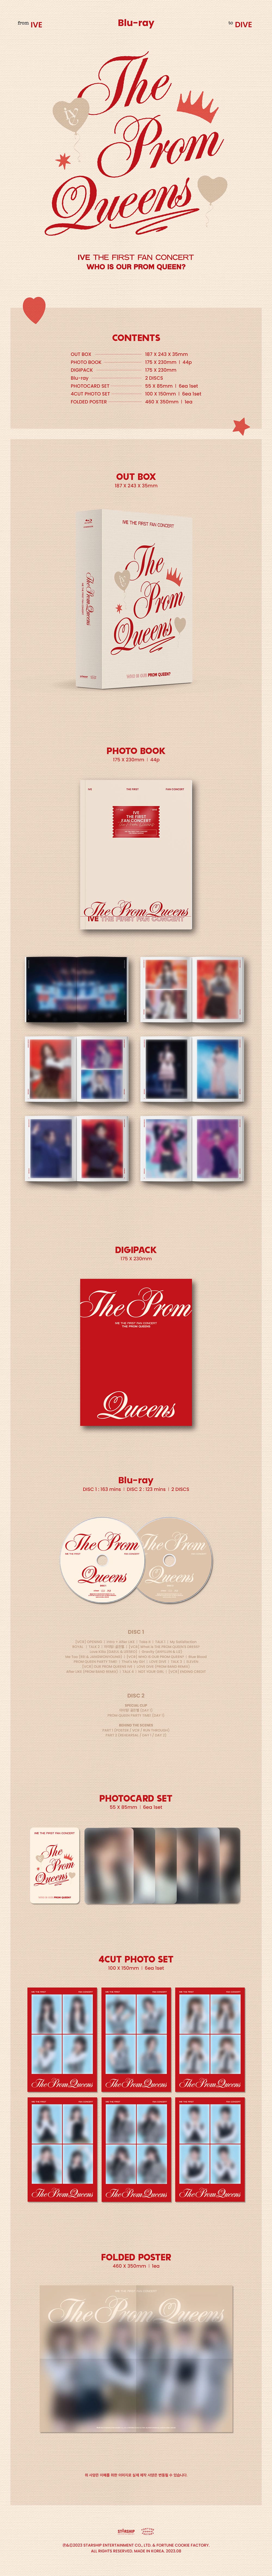 (IVE) - THE FIRST FAN CONCERT [The Prom Queens] Blu-ray